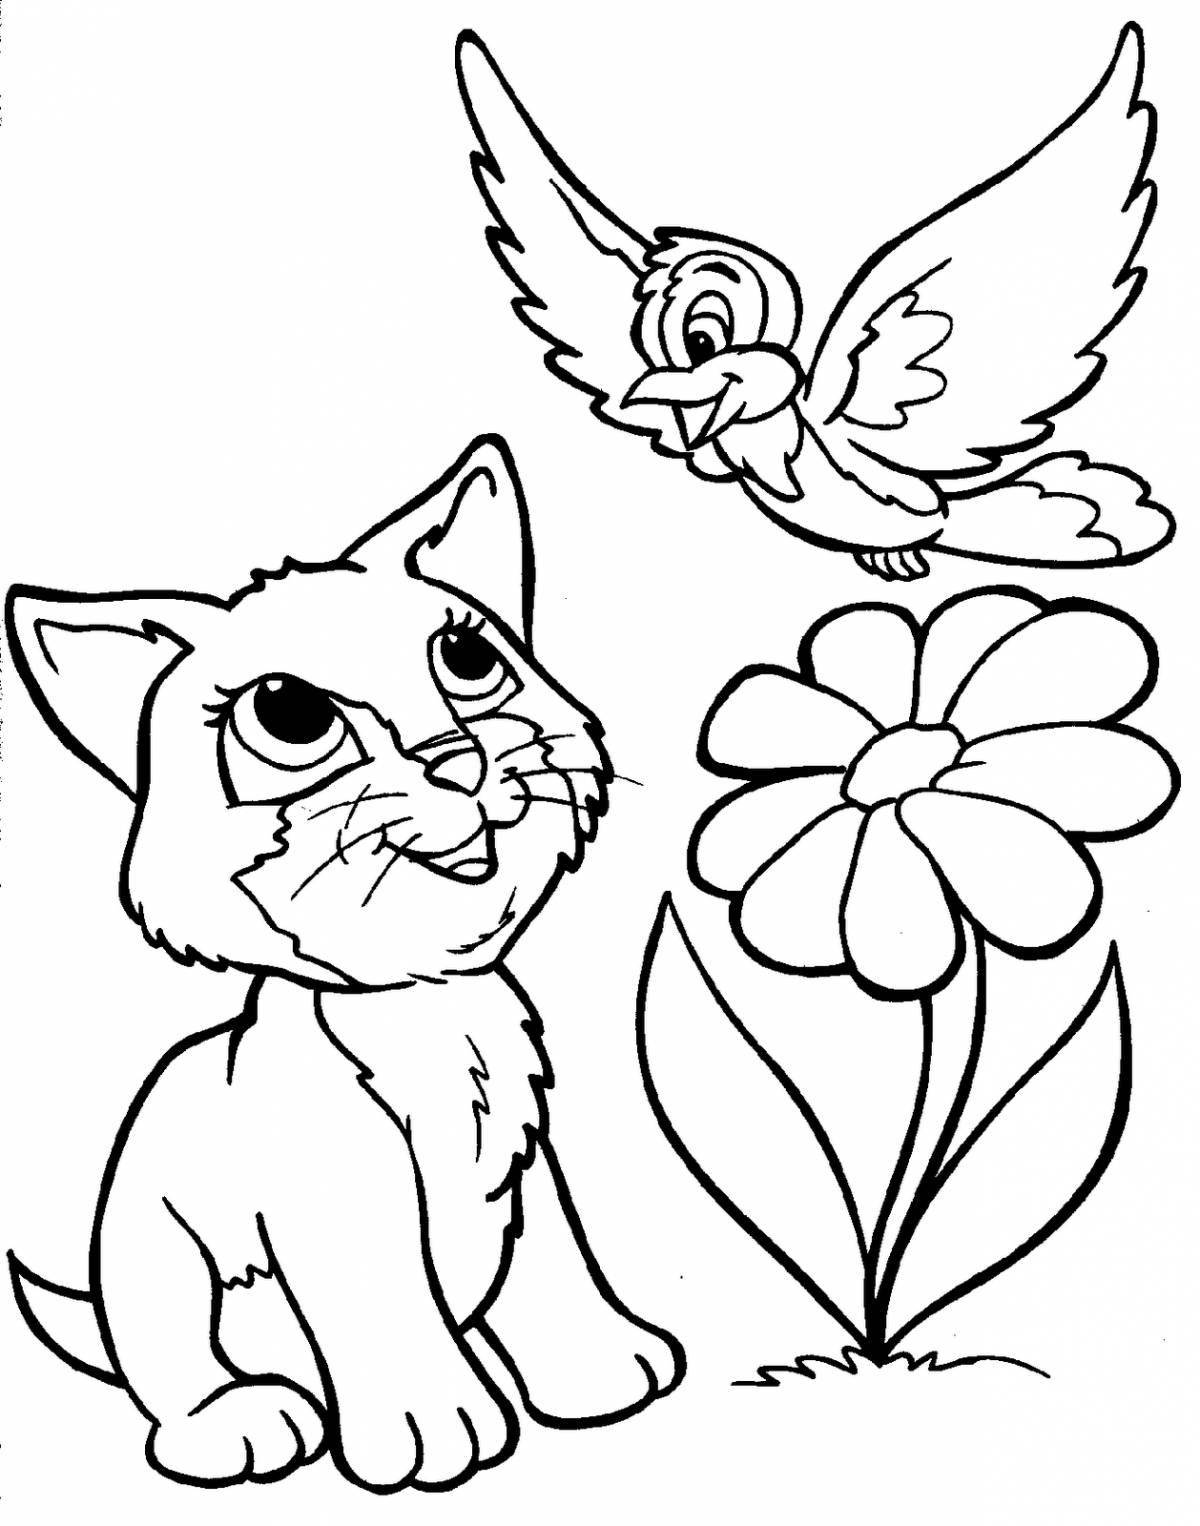 Playful animal coloring page